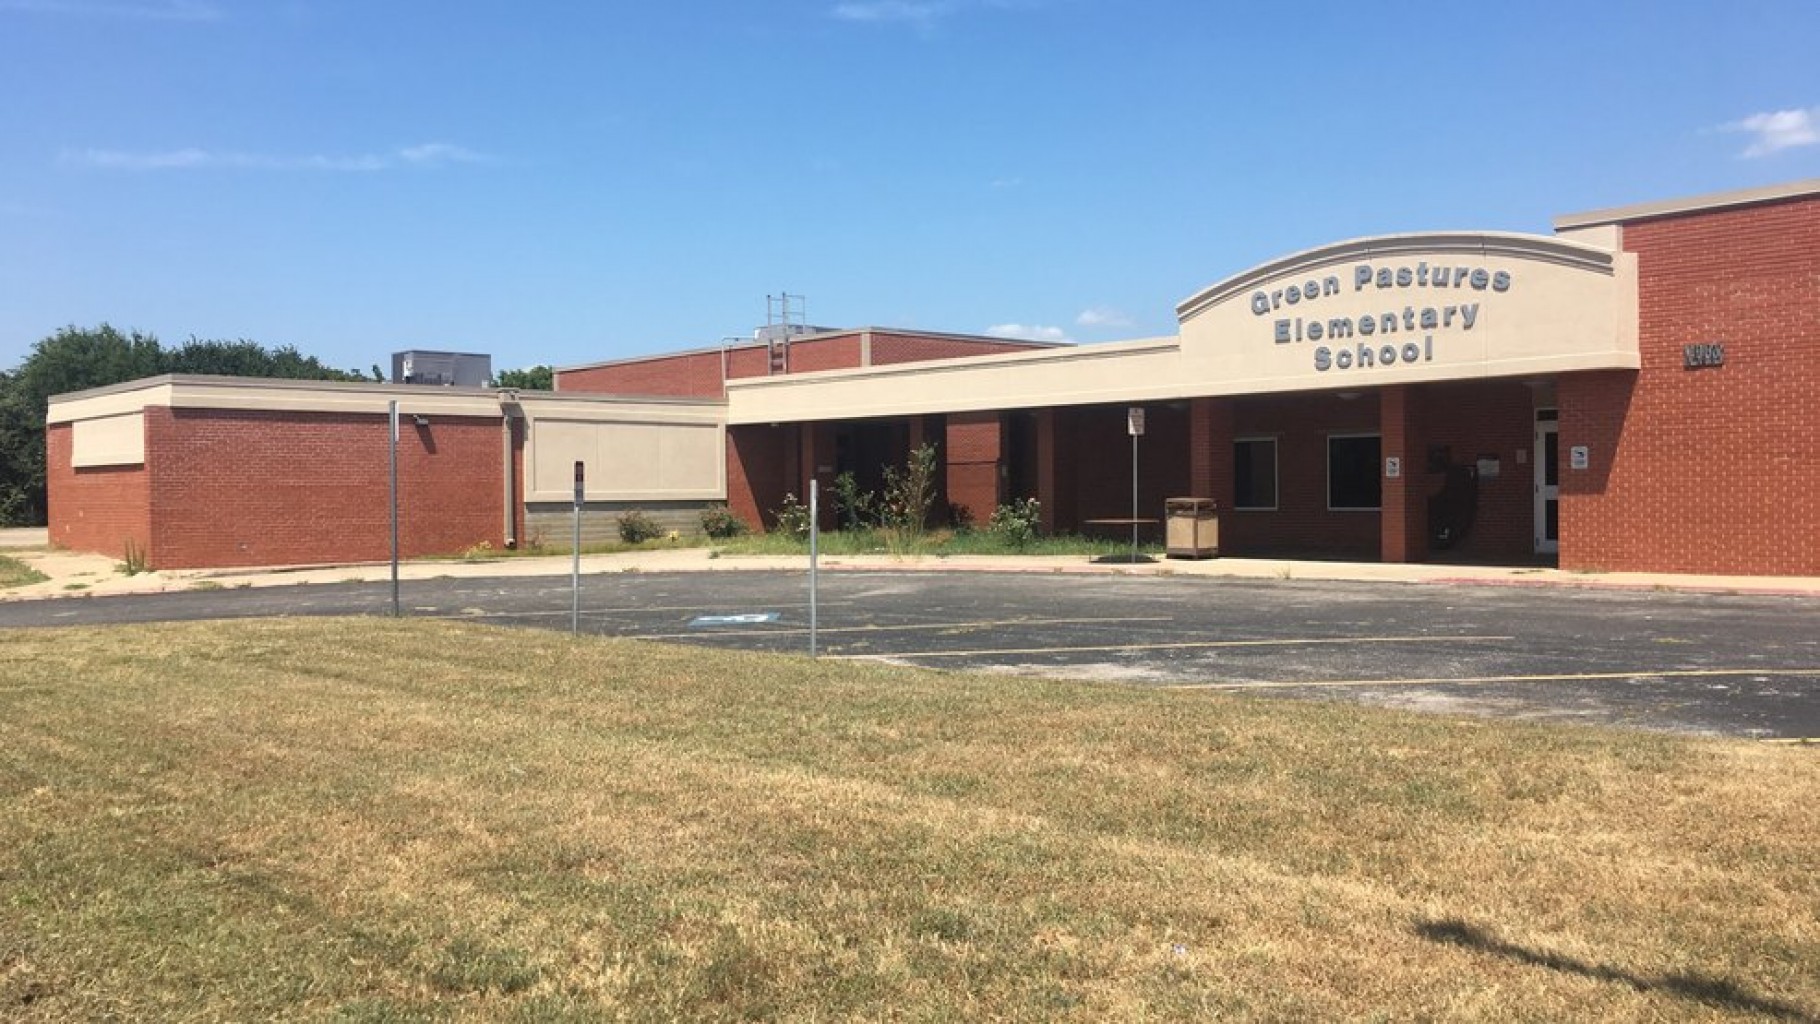 FORMER OKCPS ELEMENTARY TO BECOME FILM STUDIO AND ACADEMY